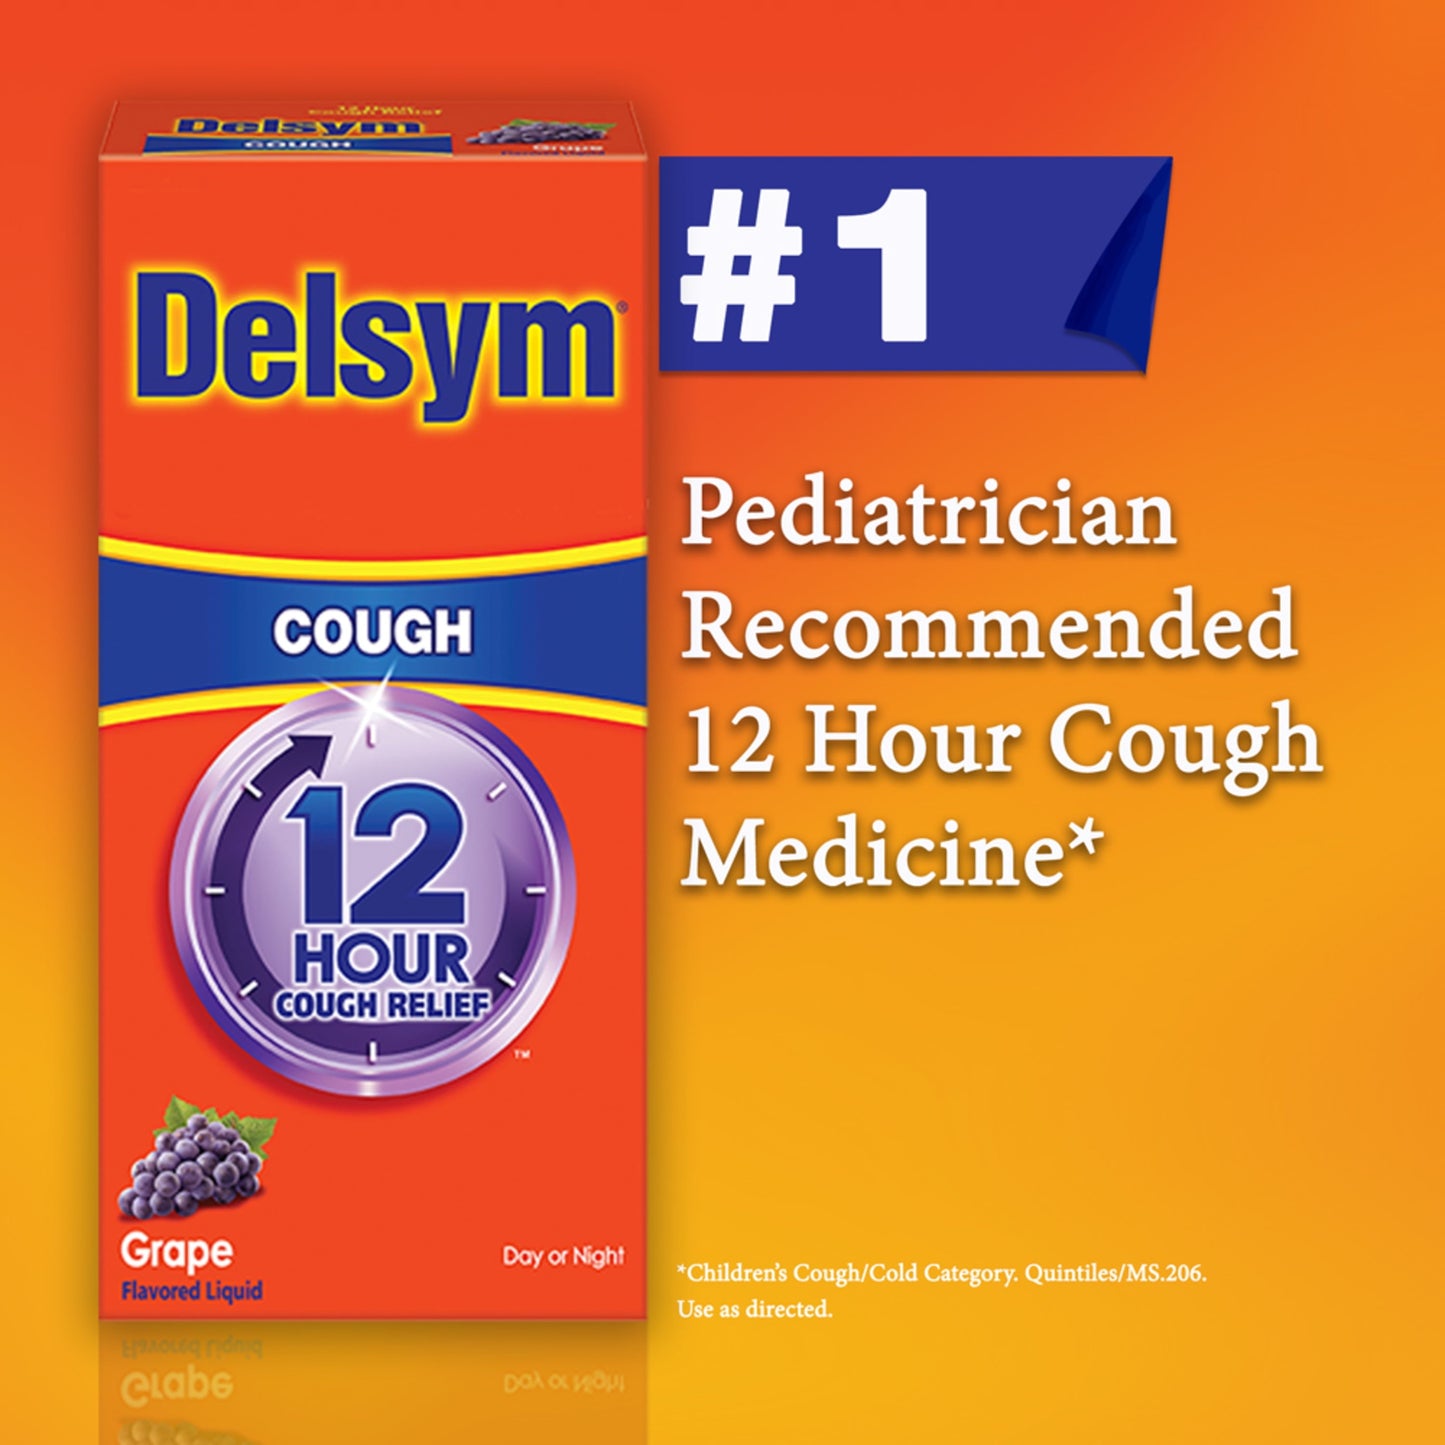 Delsym Adult 12 hour Cough Relief Medicine, Powerful Cough Relief for 12 Good Hours, Cough Suppressing Liquid, #1 Pharmacist Recommended, Grape Flavor, 3 Fl Oz